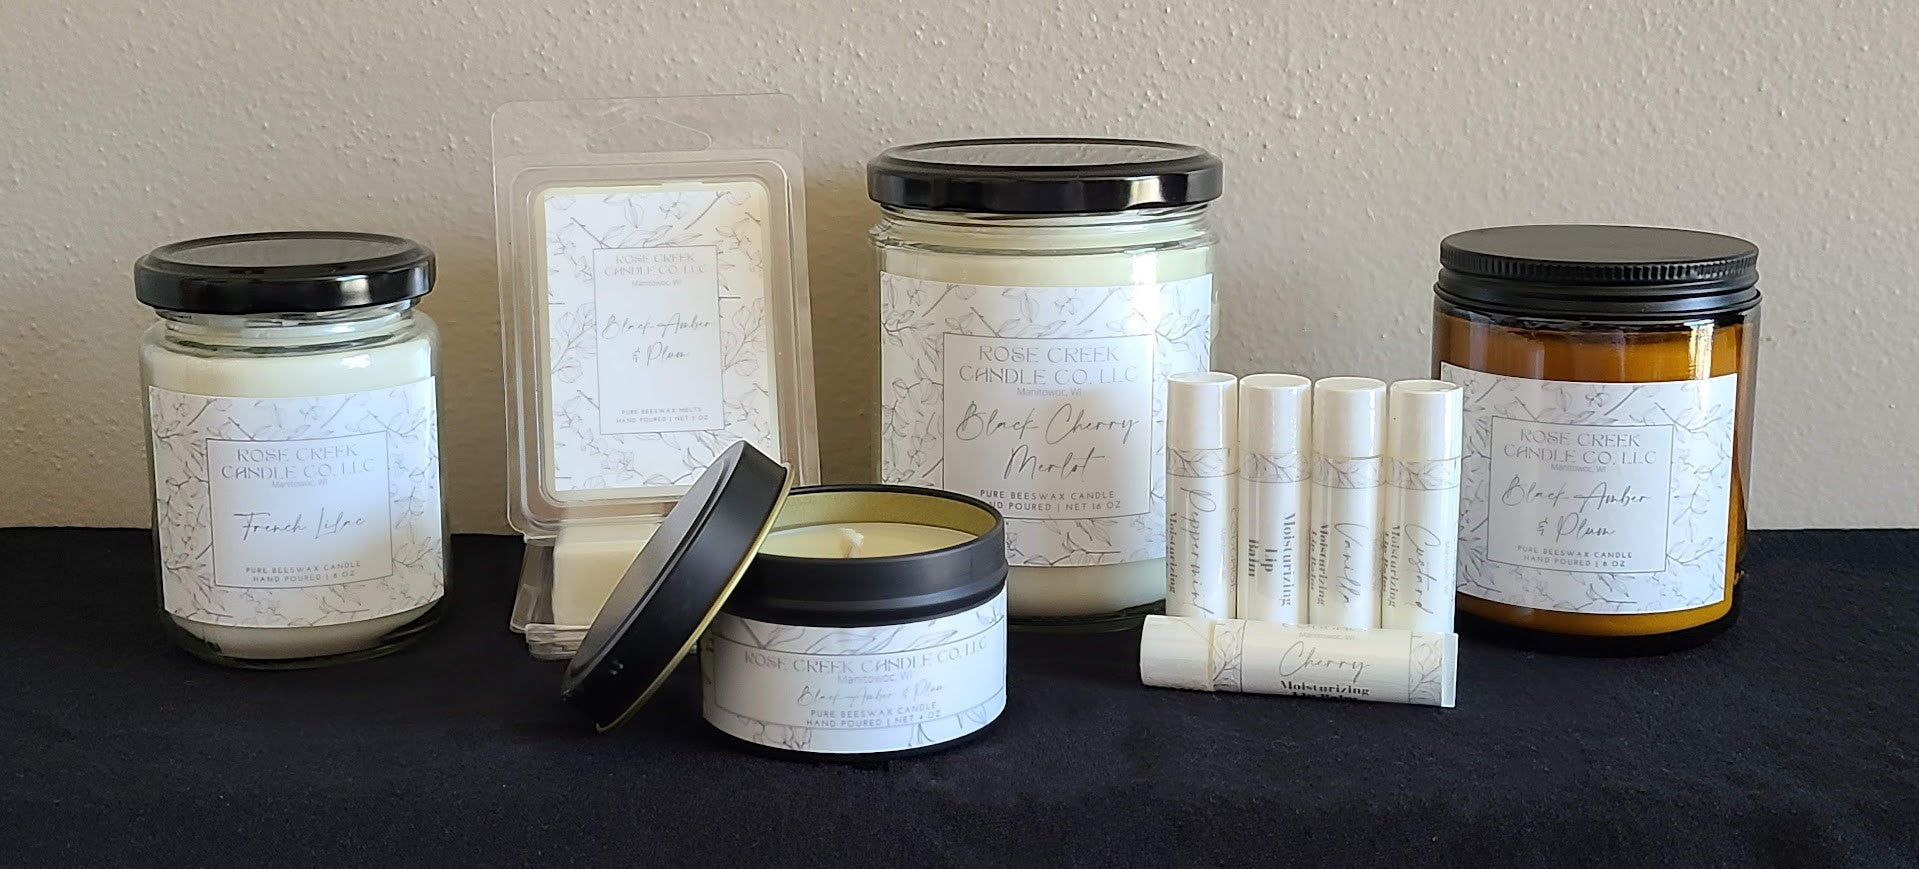 Pure Beeswax Products – Rose Creek Candle Co.